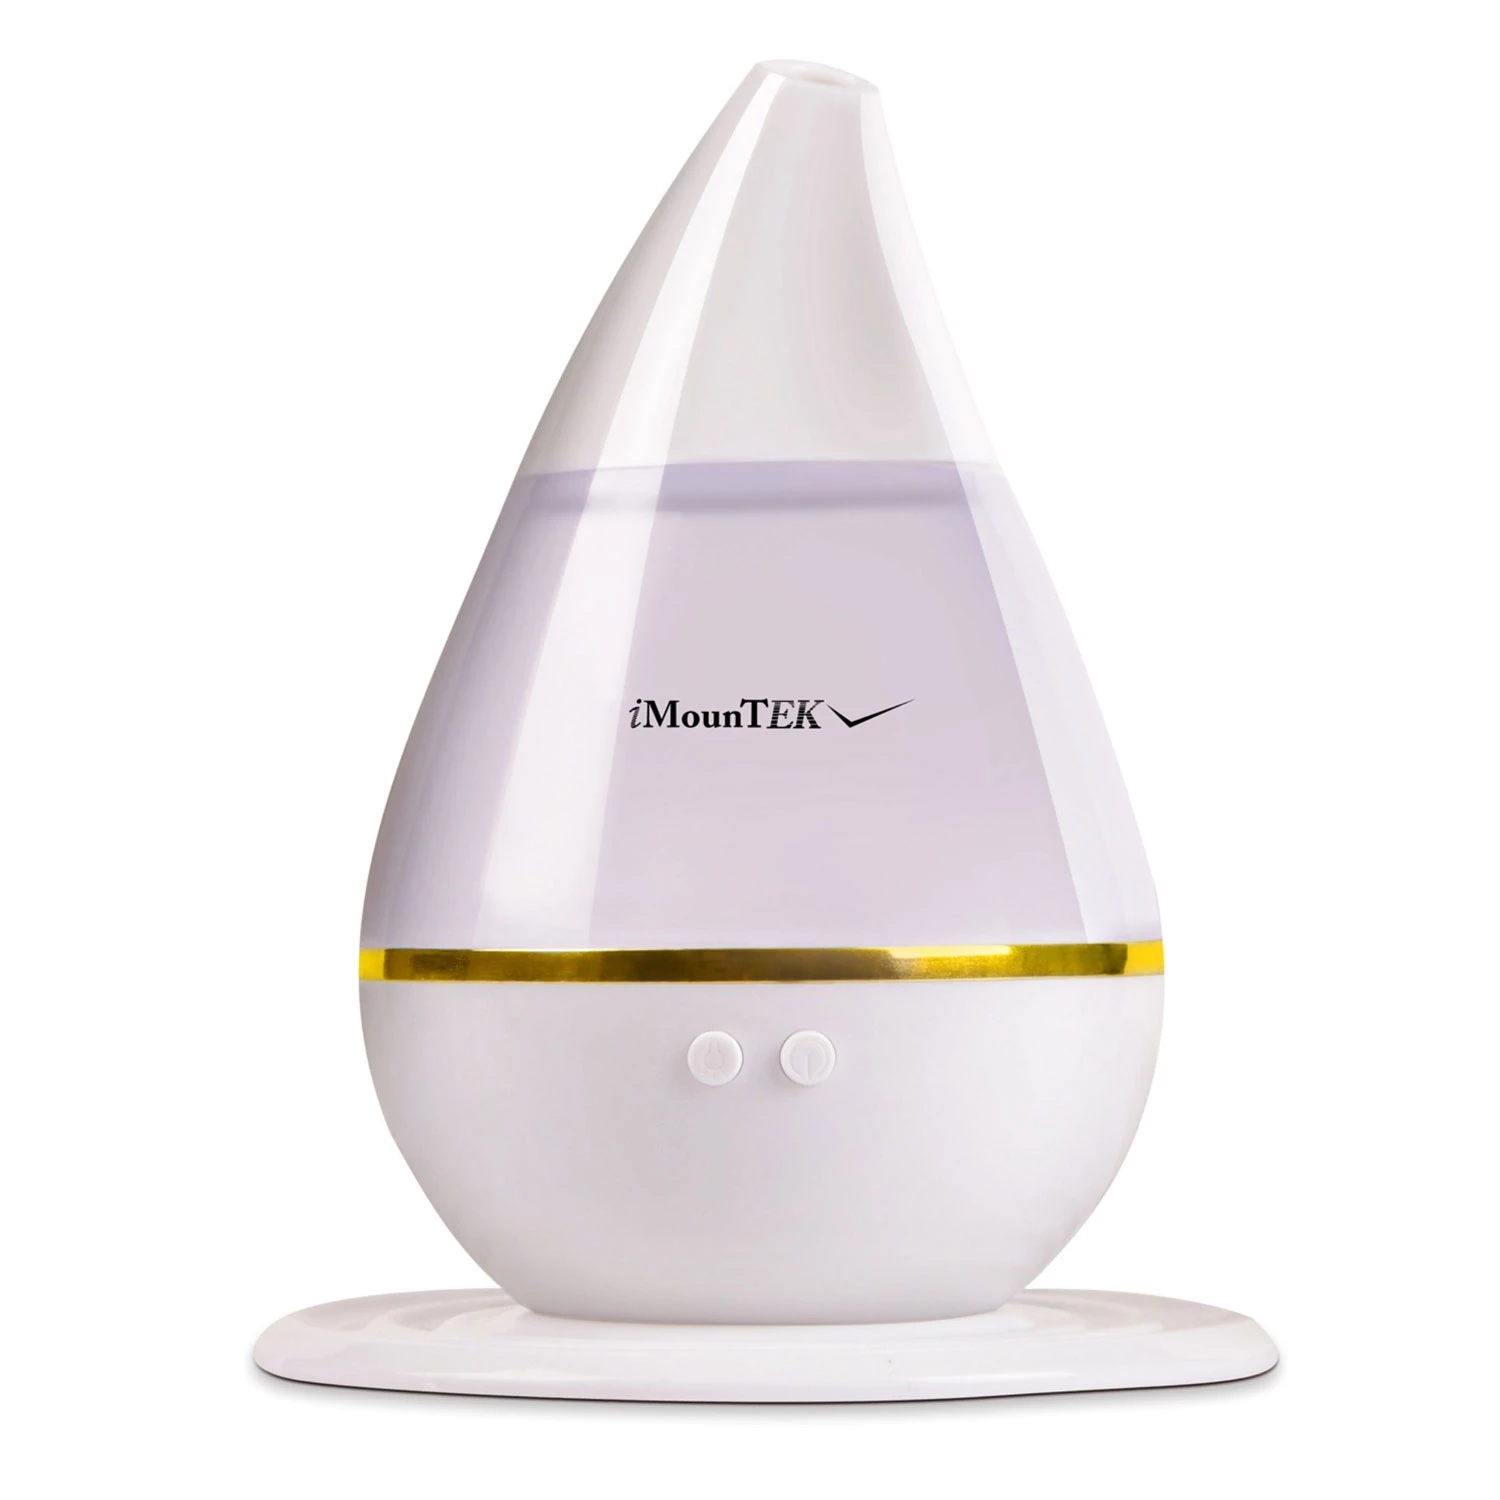 250ml Cool Mist Humidifier with 7 Color LED Lights - Perfect for Office, Home, Vehicle, Study, Yoga